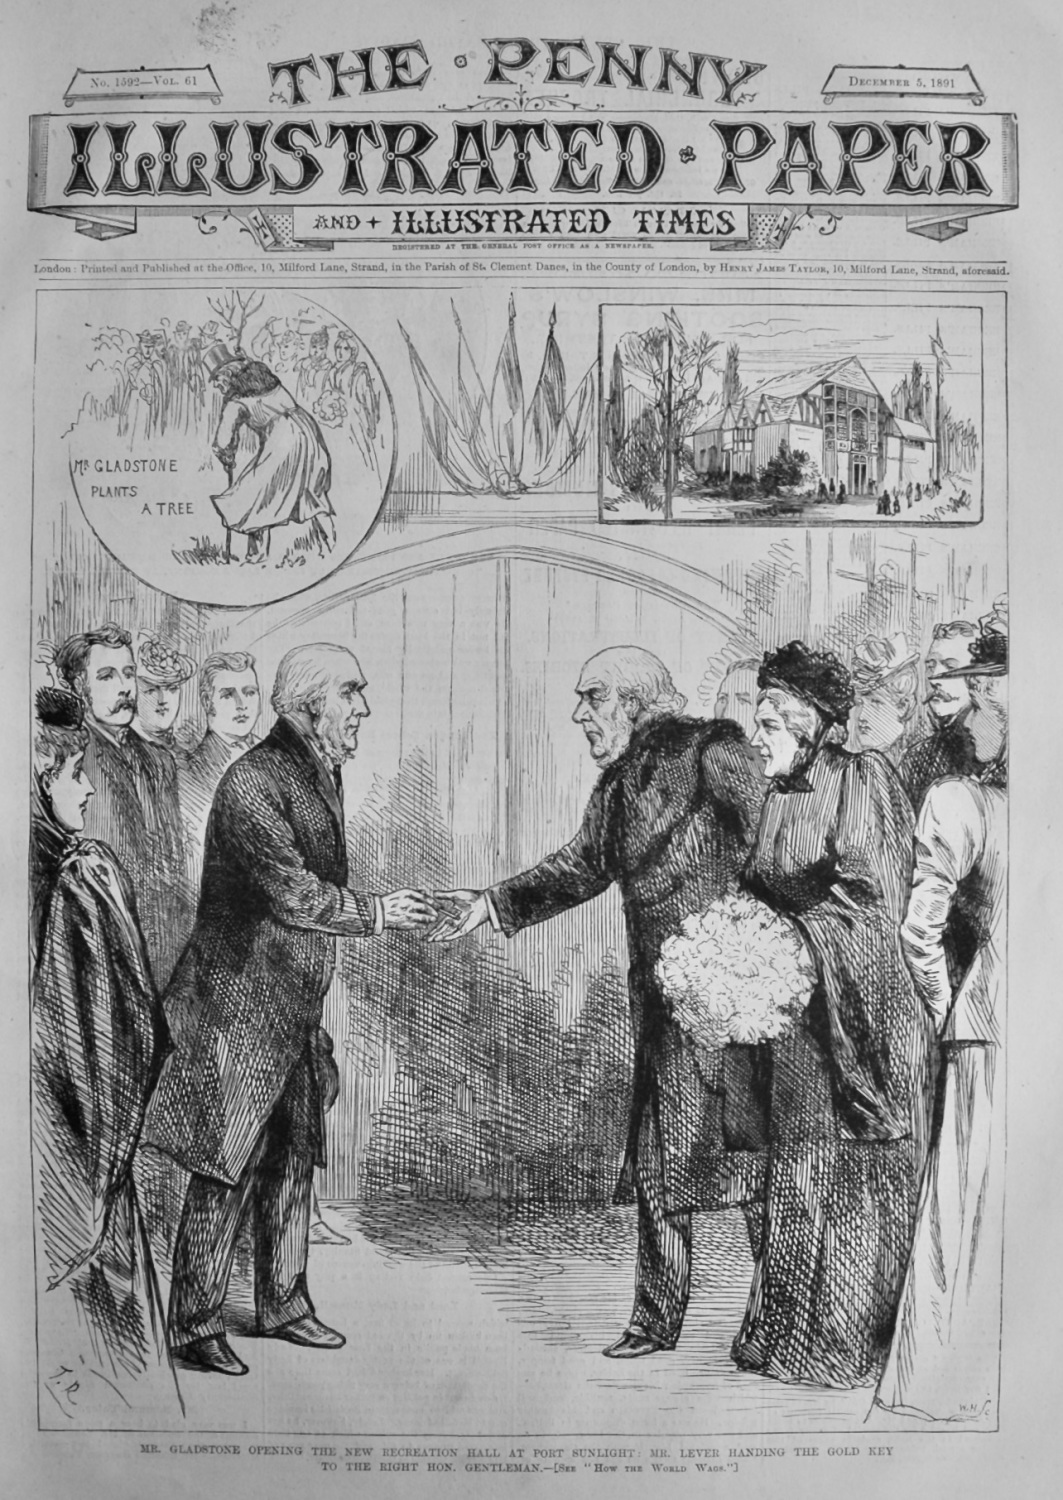 Mr. Gladstone Opening the new Recreation Hall at Port Sunlight :  Mr. Lever